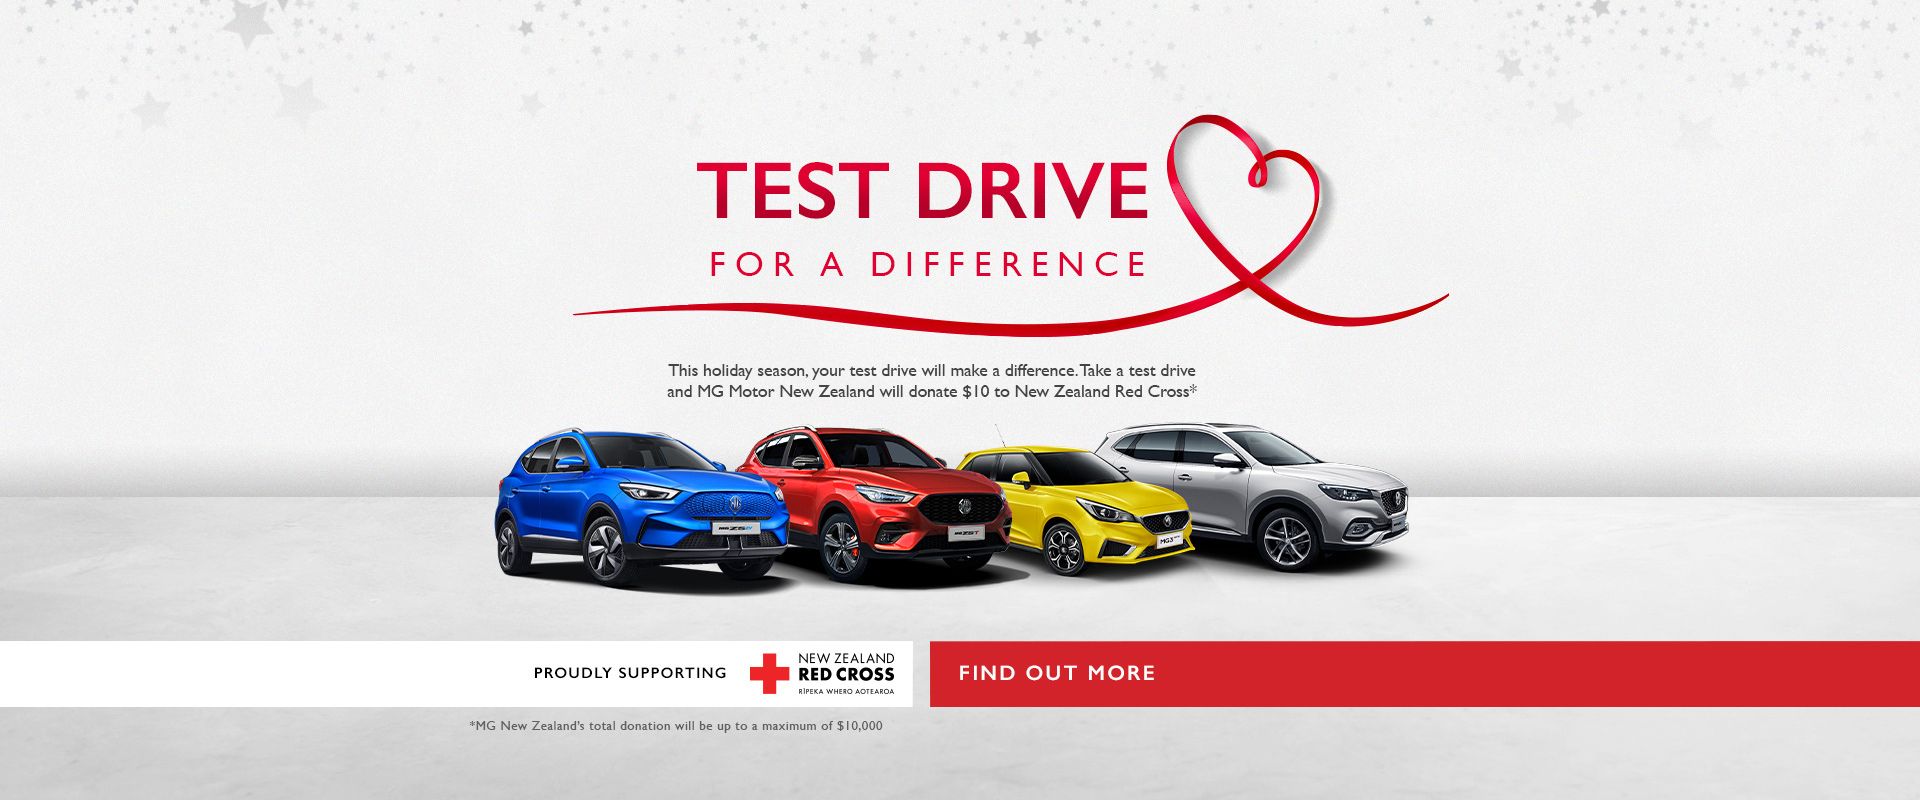 This holiday season, your test drive will make a difference. Take a test drive and MG Motor New Zealand will donate 10 dollars to New Zealand Red Cross. 